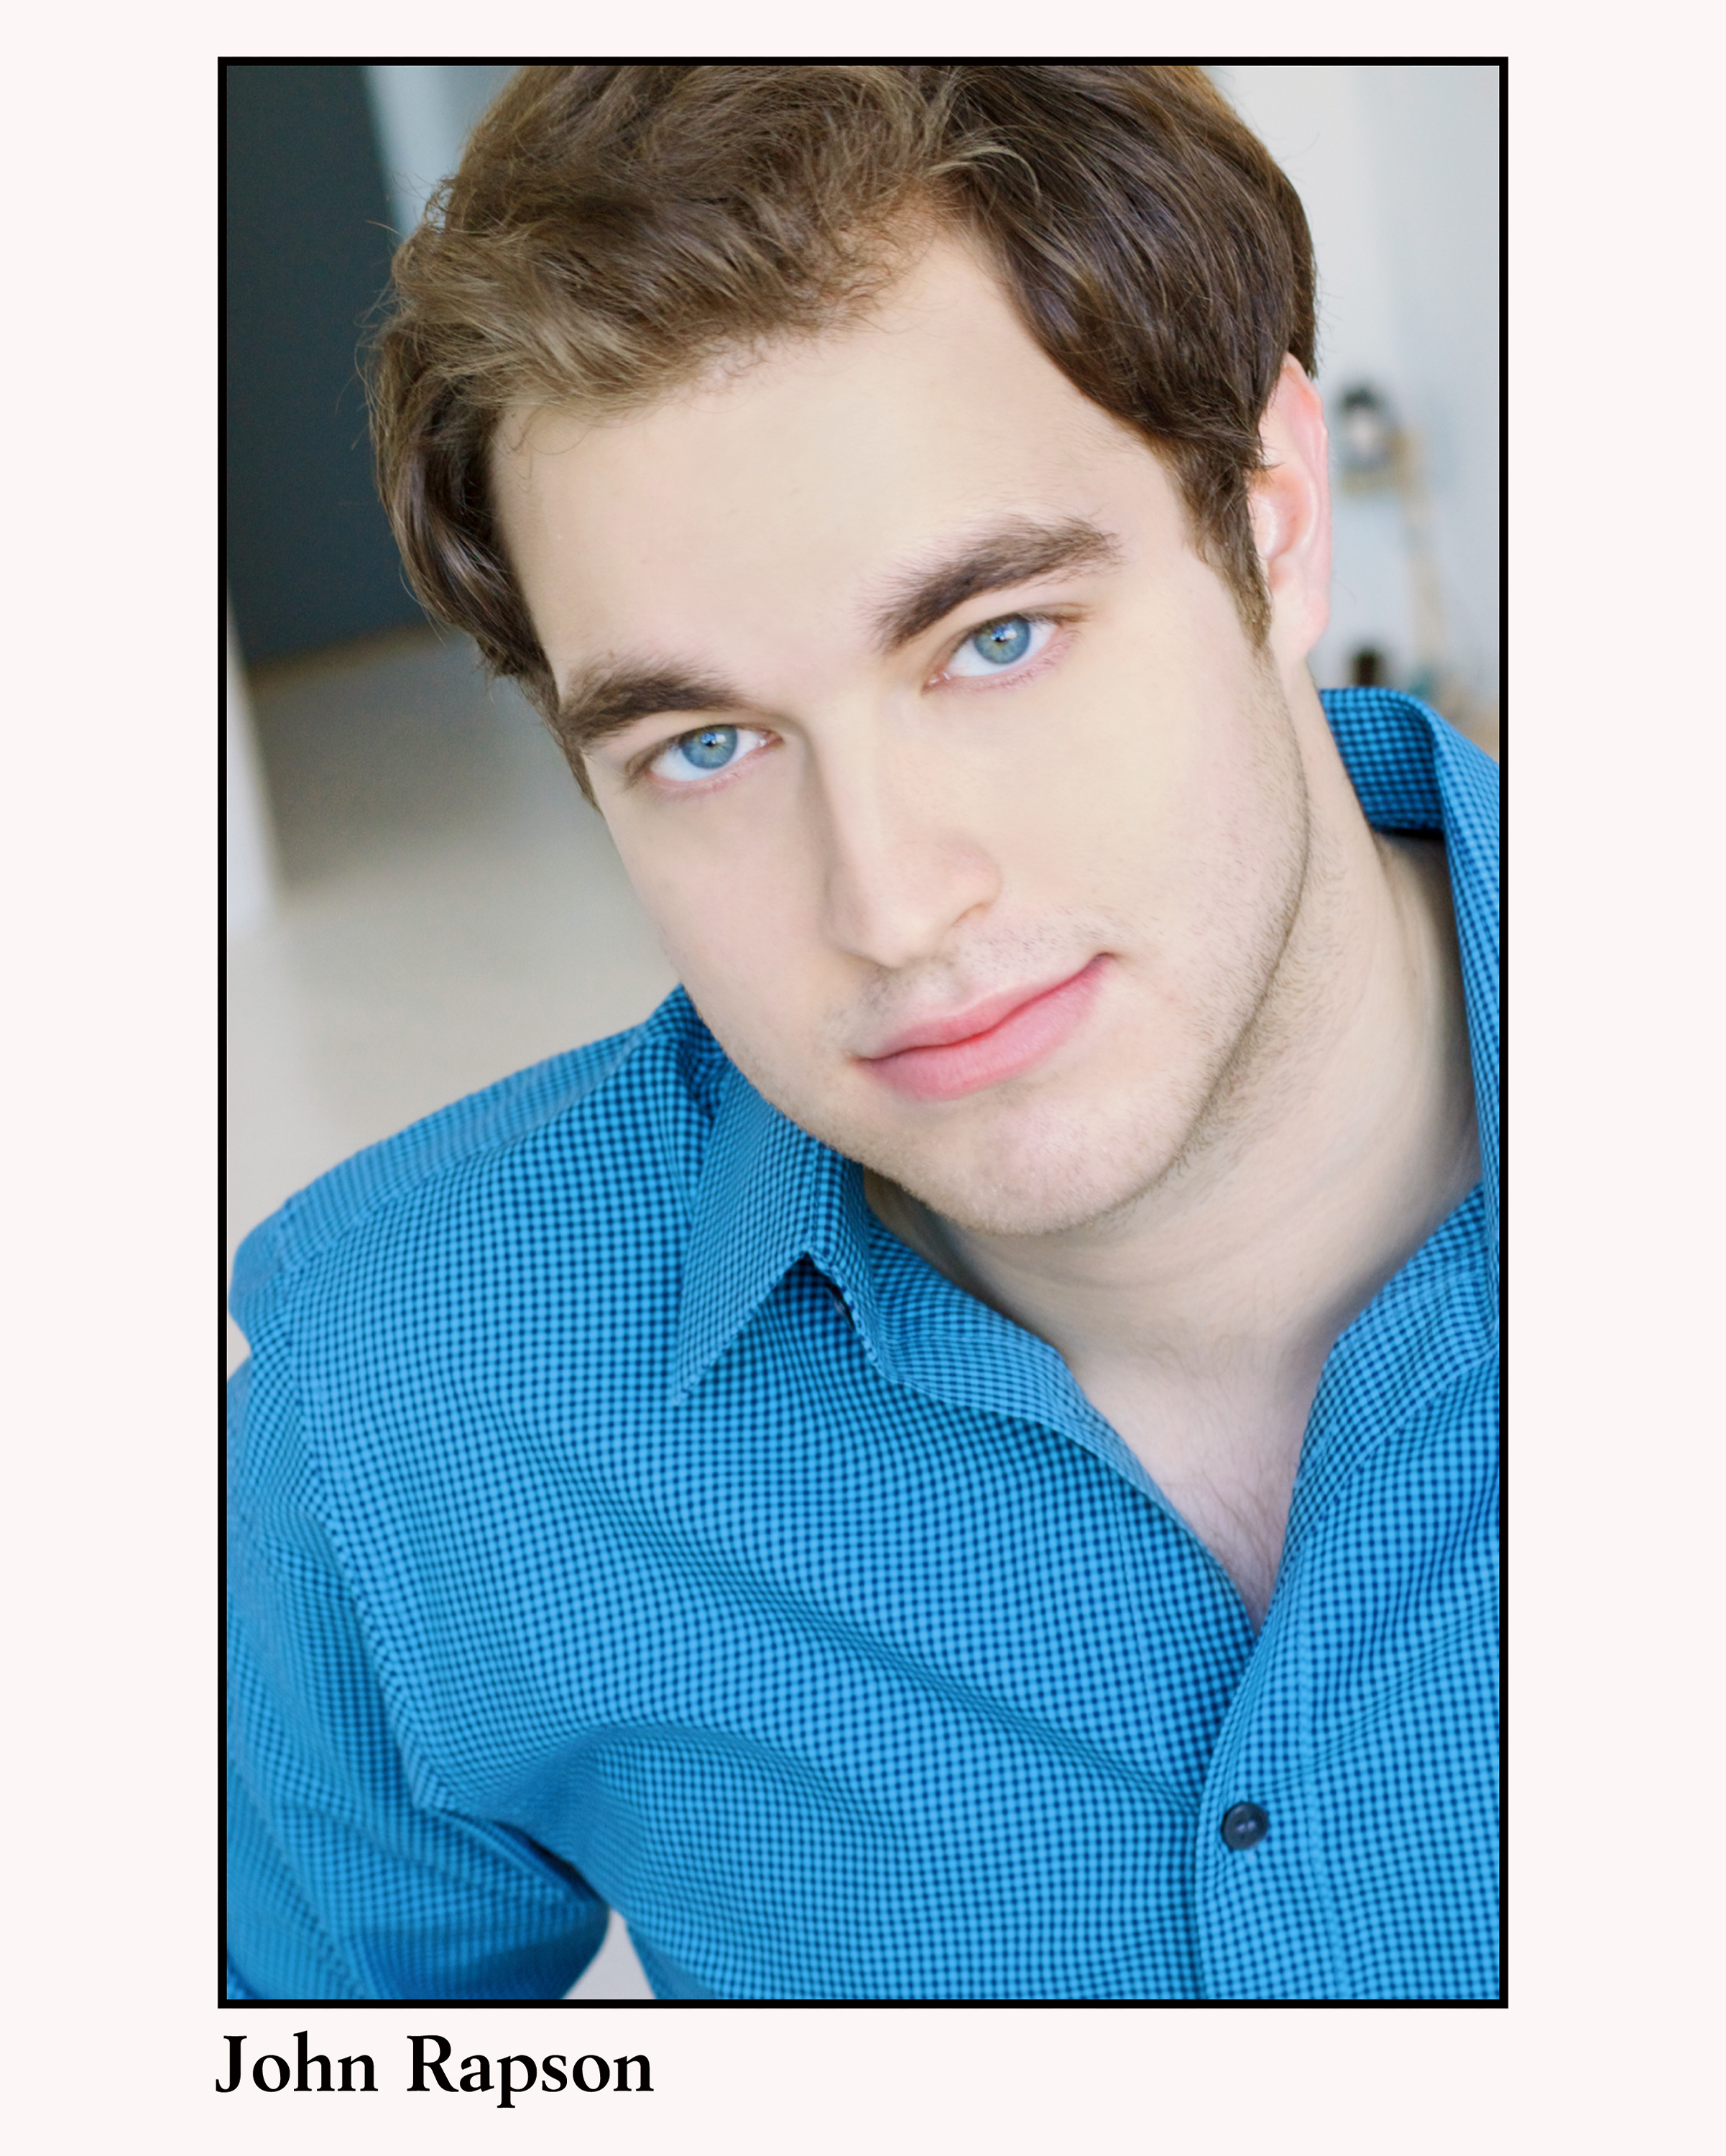 Broadway In Chicago Announces Casting For First National Tour of A GENTLEMAN’S GUIDE TO LOVE & MURDERs 1 Broadway In Chicago and producer Joey Parnes are pleased to announce that casting for the First National Tour of the Tony® Award-winning Best Musical, A Gentleman’s Guide to Love & Murder, is complete.  John Rapson will play the role of the eight D’Ysquith heirs and Kevin Massey will portray the role of Monty Navarro.  The First National Tour will preview at Proctors in Schenectady before beginning performances at Chicago’s Bank of America Theatre (18 W. Monroe) September 29, 2015 through October 11, 2015.